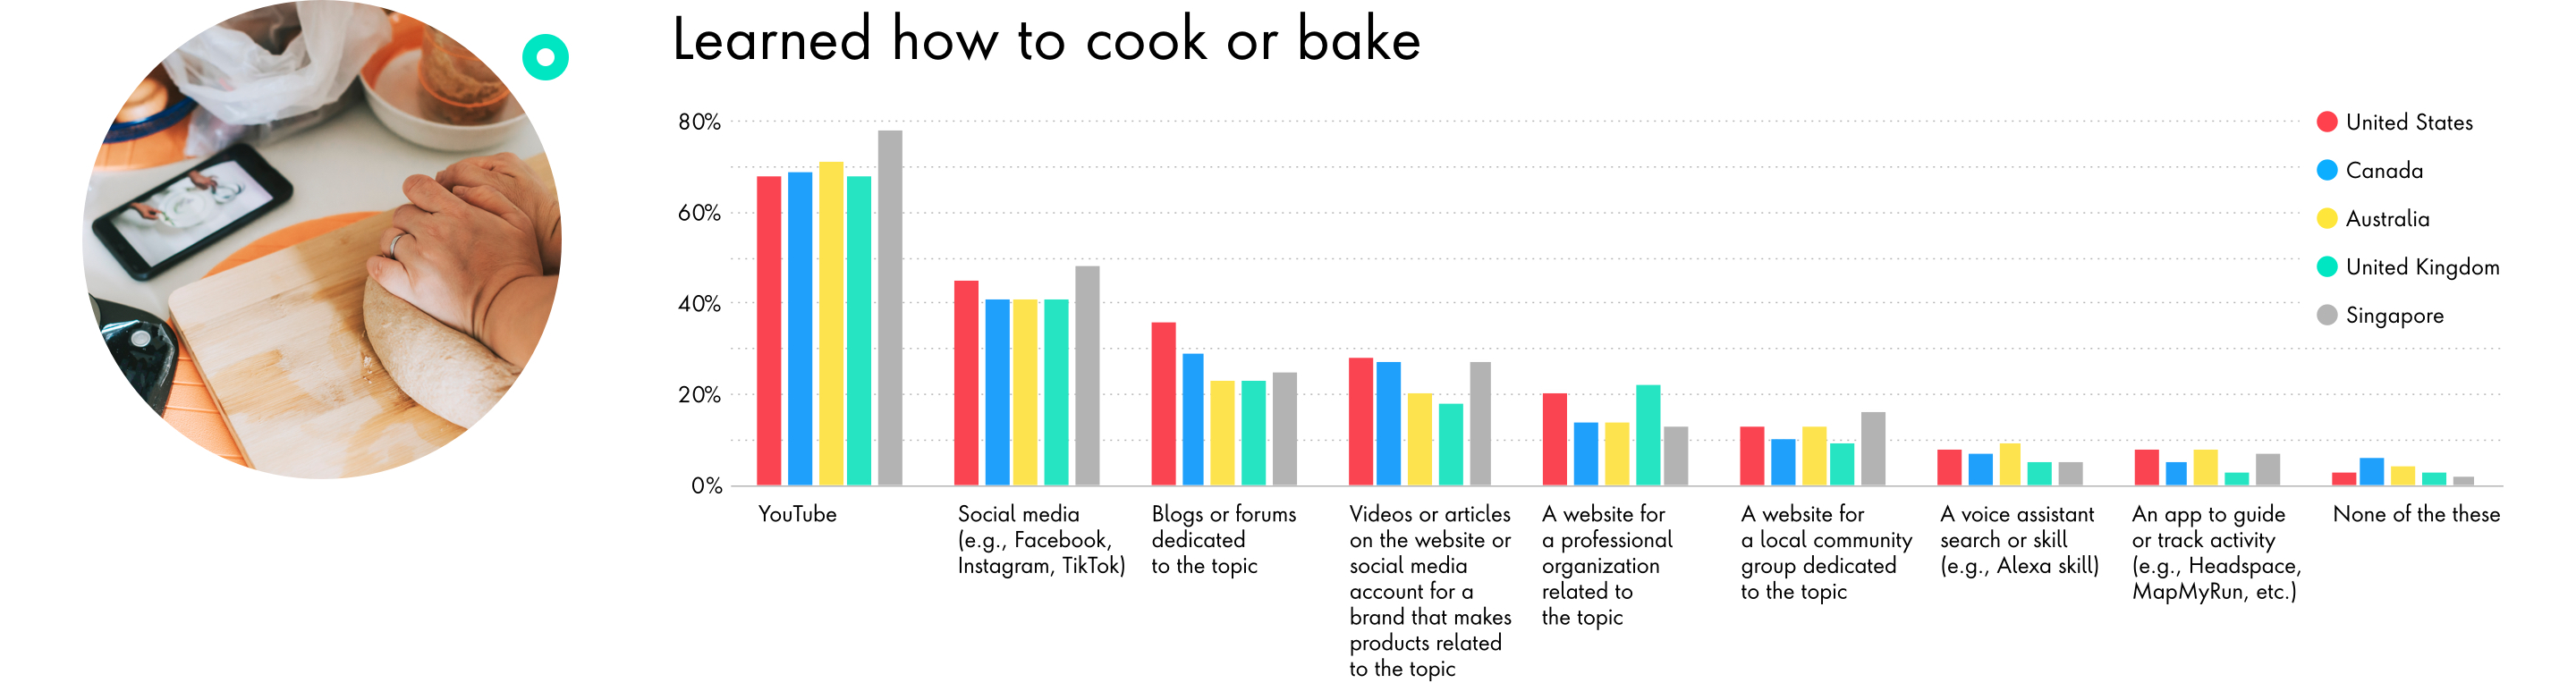 Chart: Learned how to cook or bake